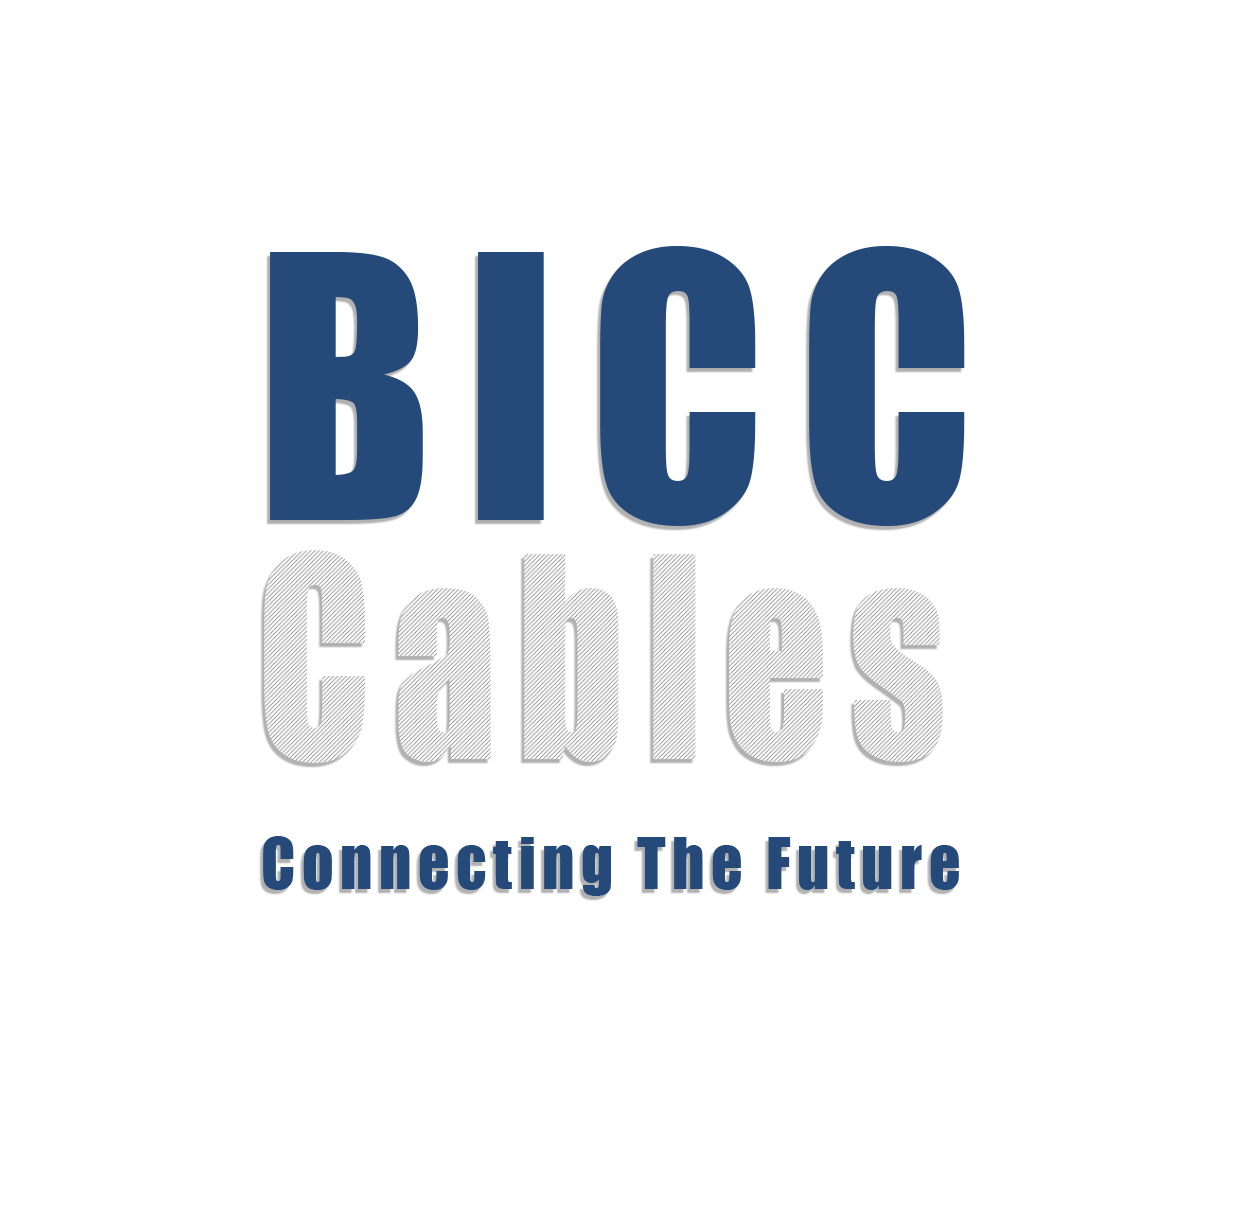 bicc cables